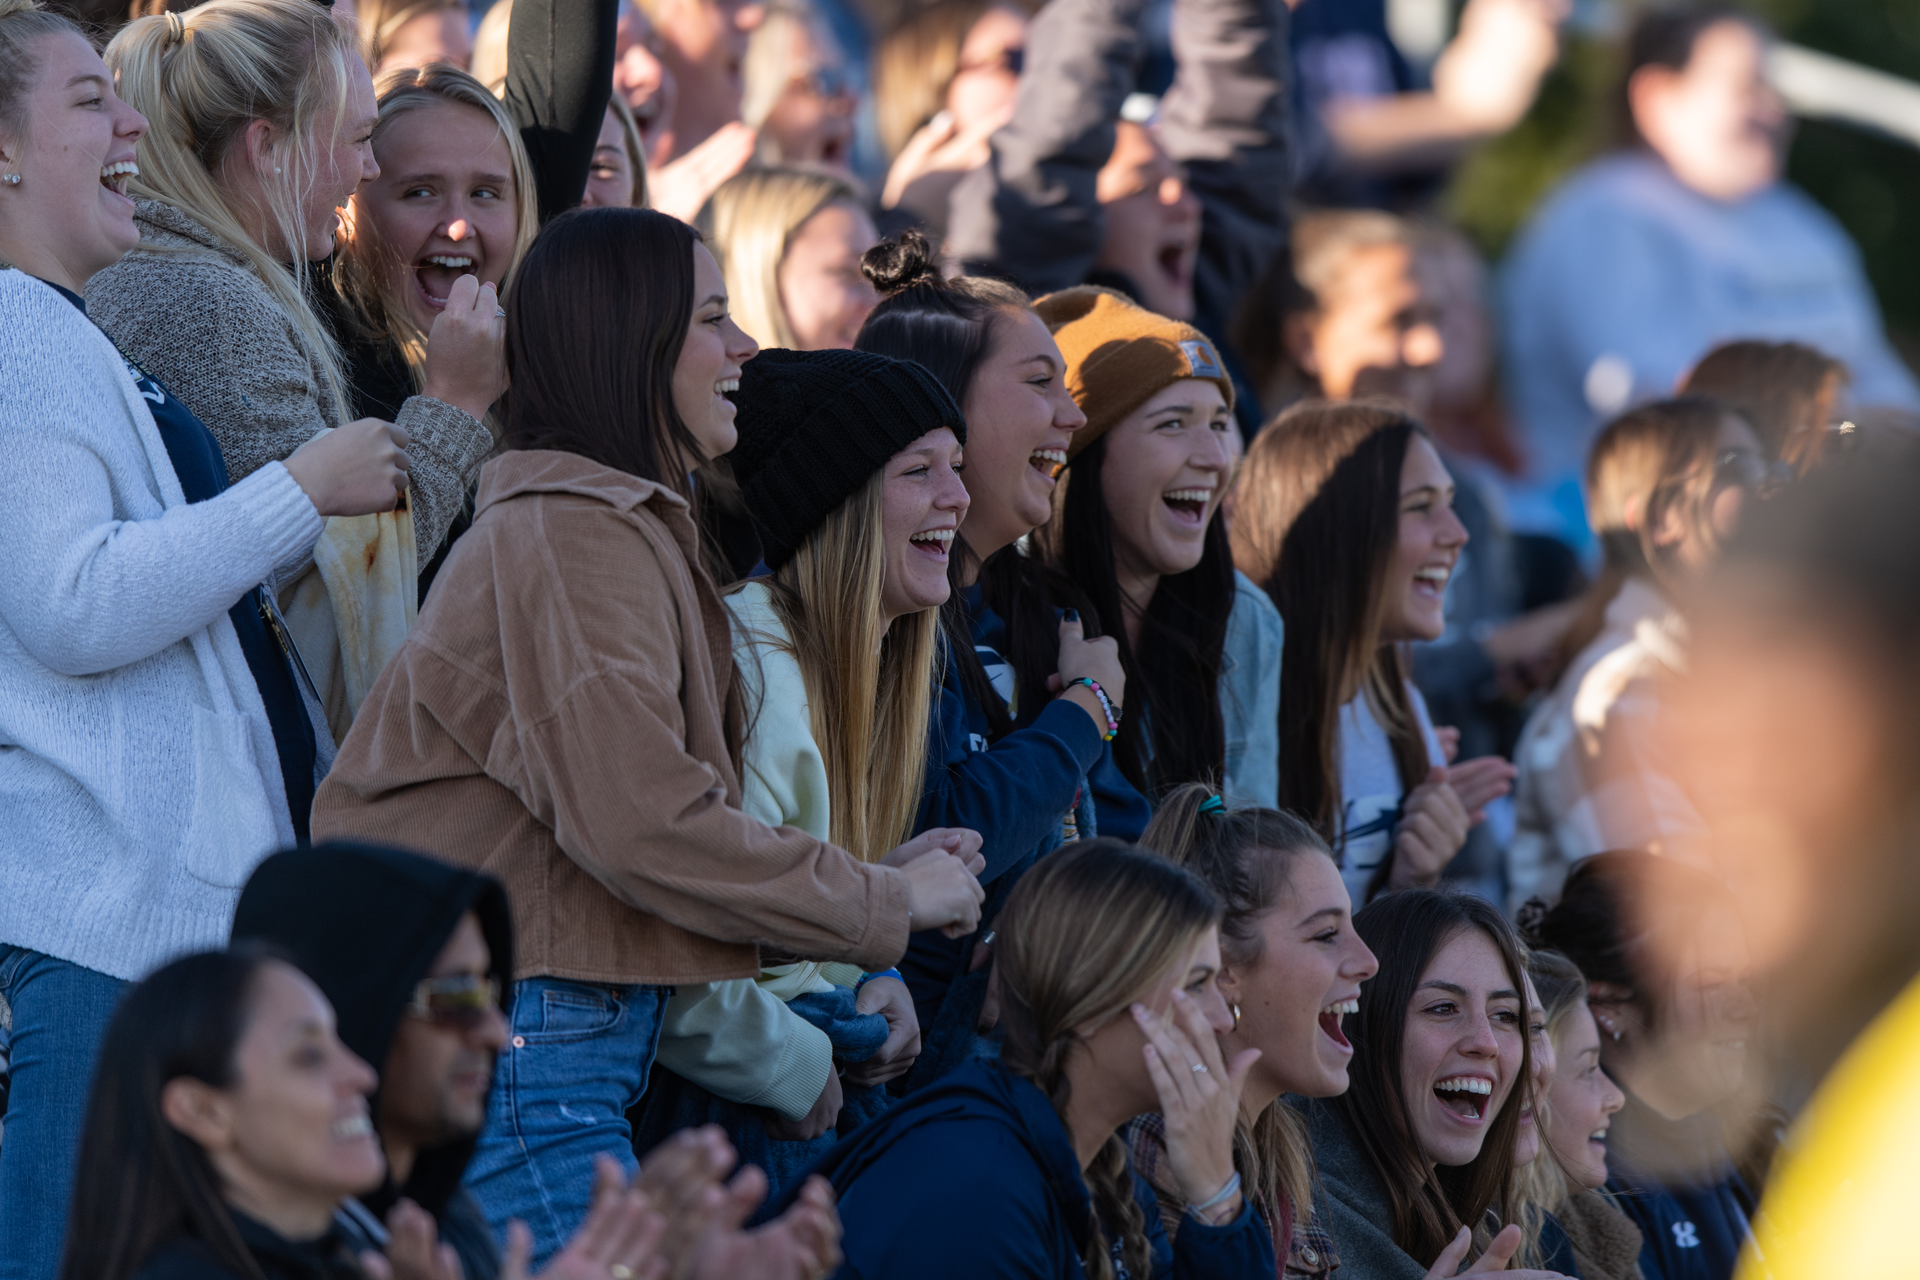 A group of students laughs and cheers for the soccer team in fall clothes and stocking caps.